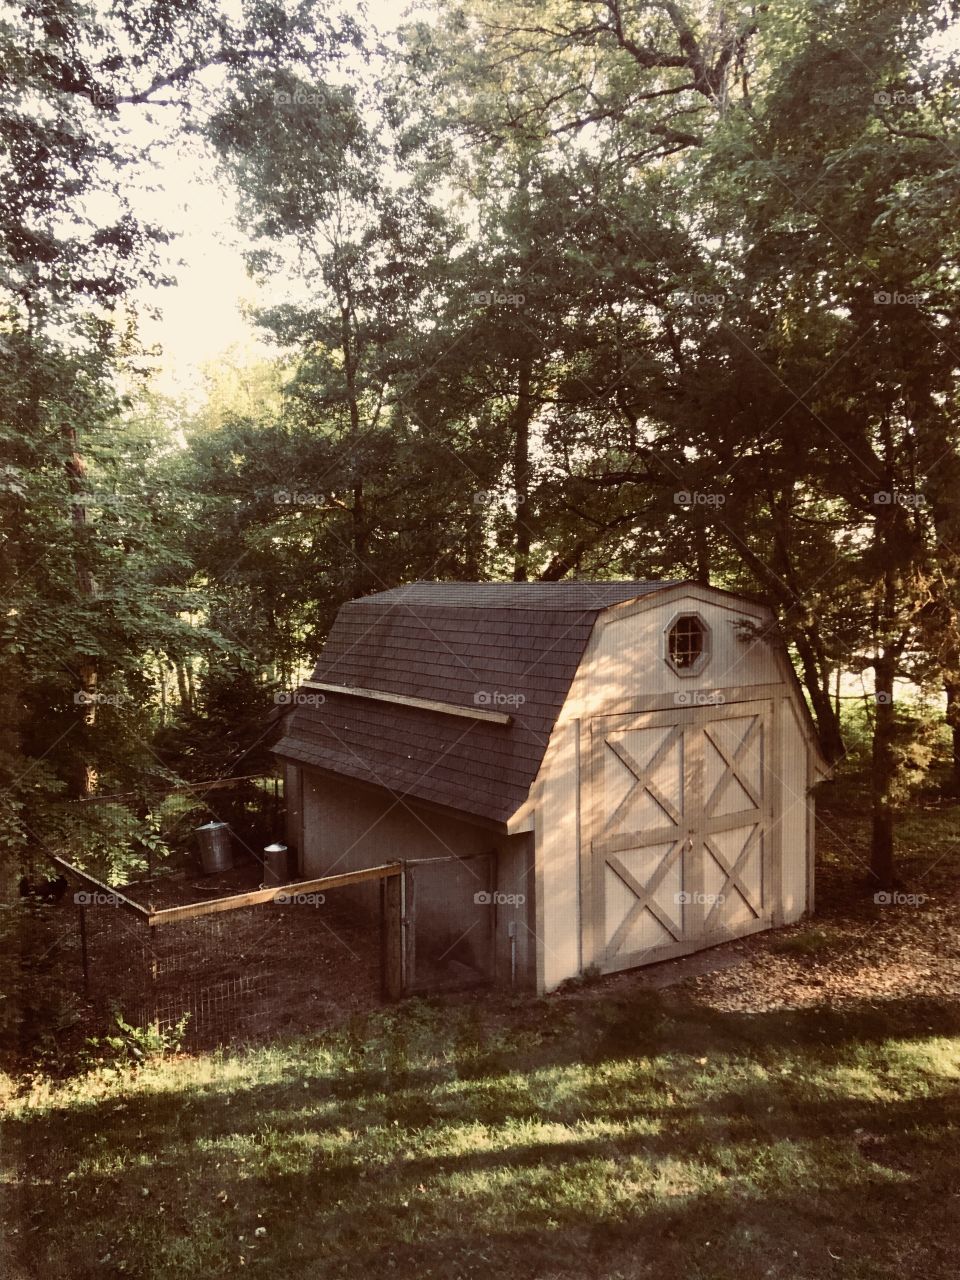 Chicken coop and shed